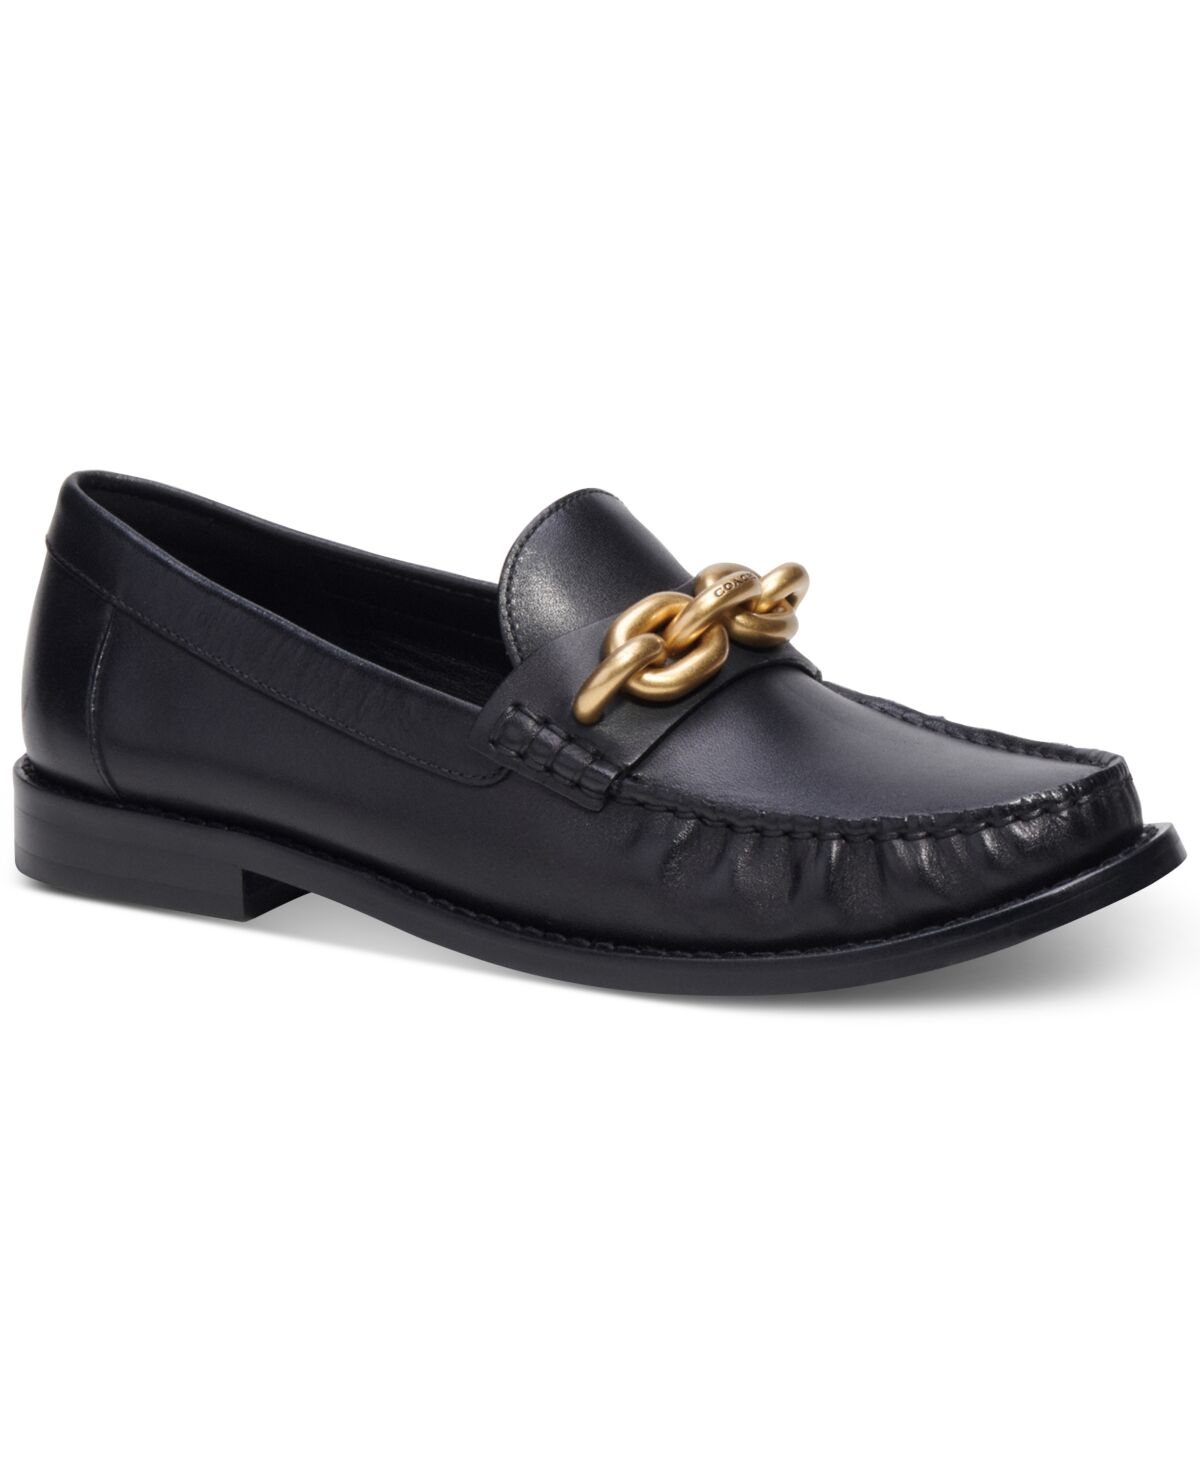 Coach Women's Jess Chain-Strap Moccasin Loafers - Black/ Gold Leather